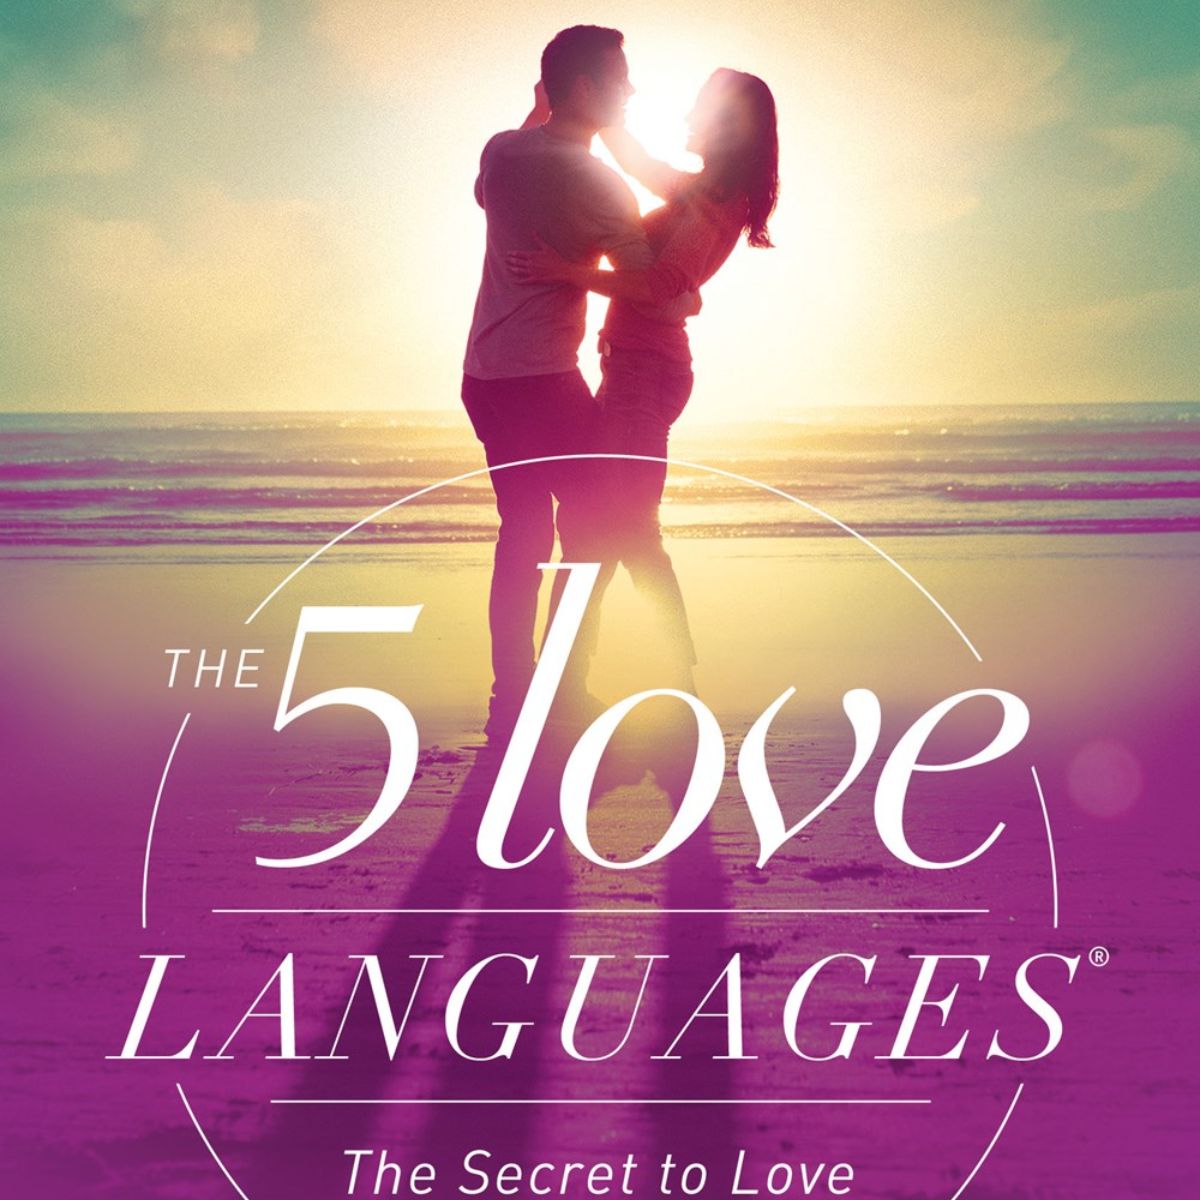 The 5 Love Languages: The Secret to Love That Lasts